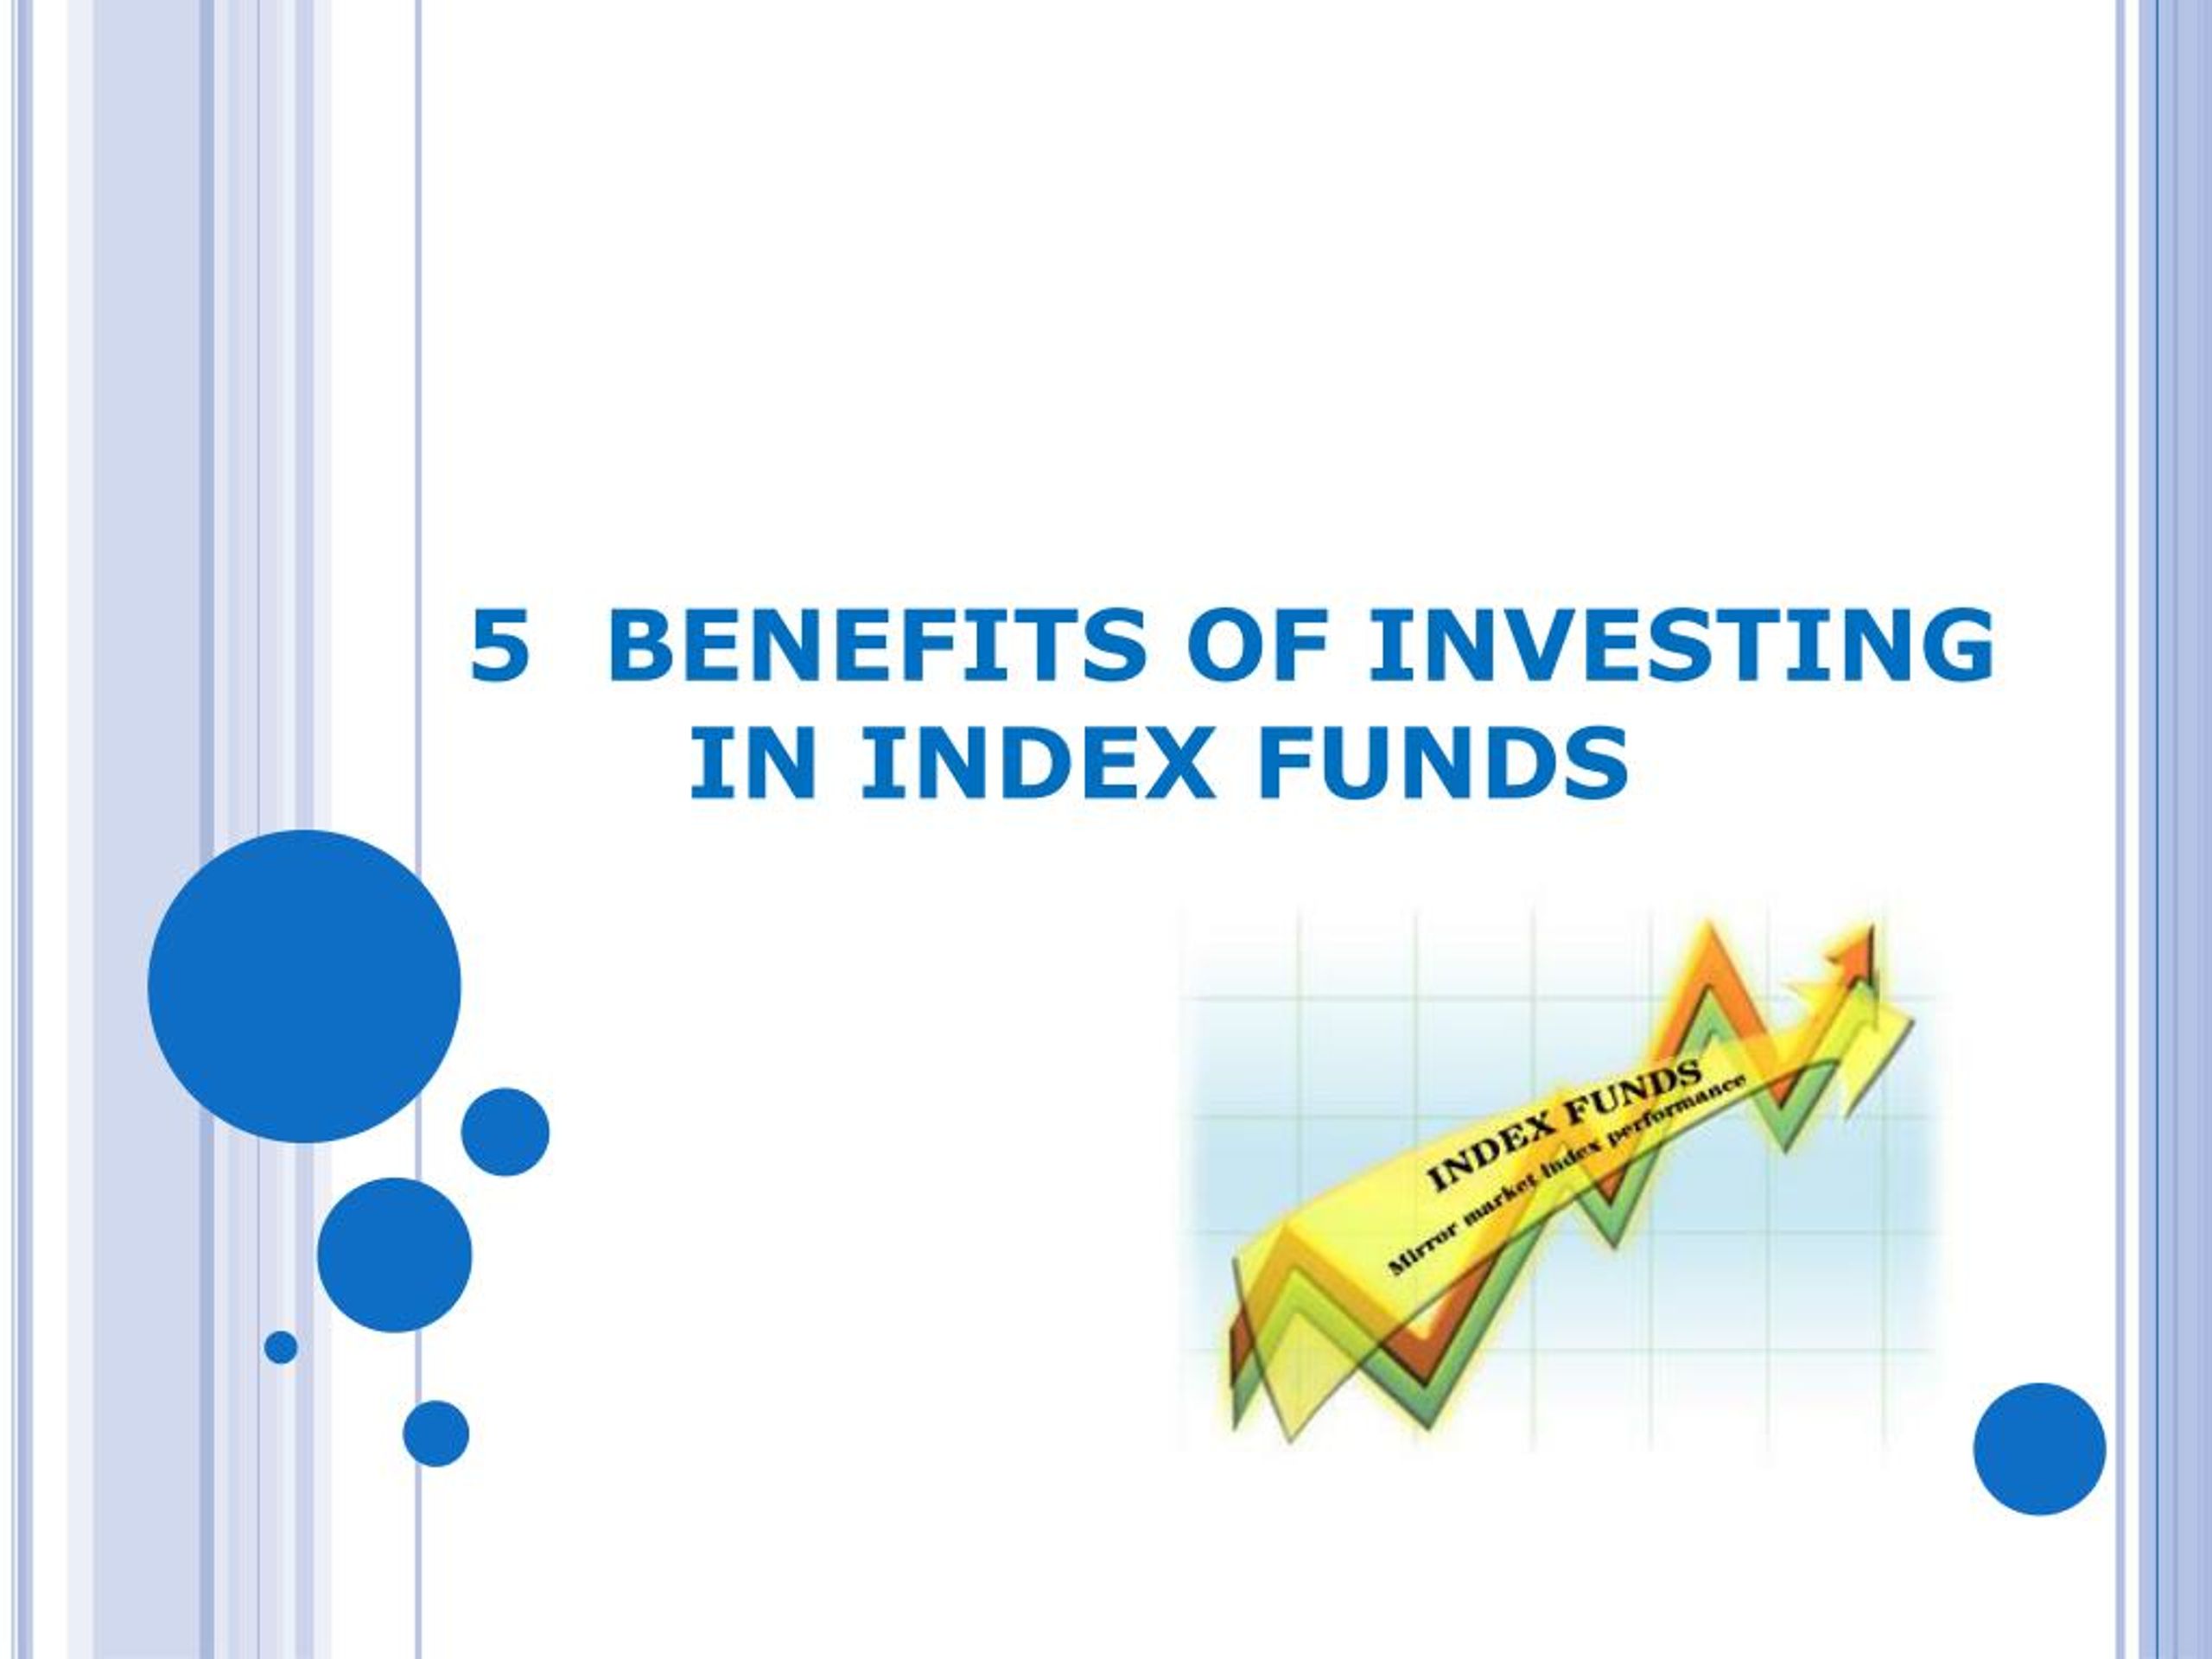 PPT 5 BENEFITS OF INVESTING IN INDEX FUNDS PowerPoint Presentation